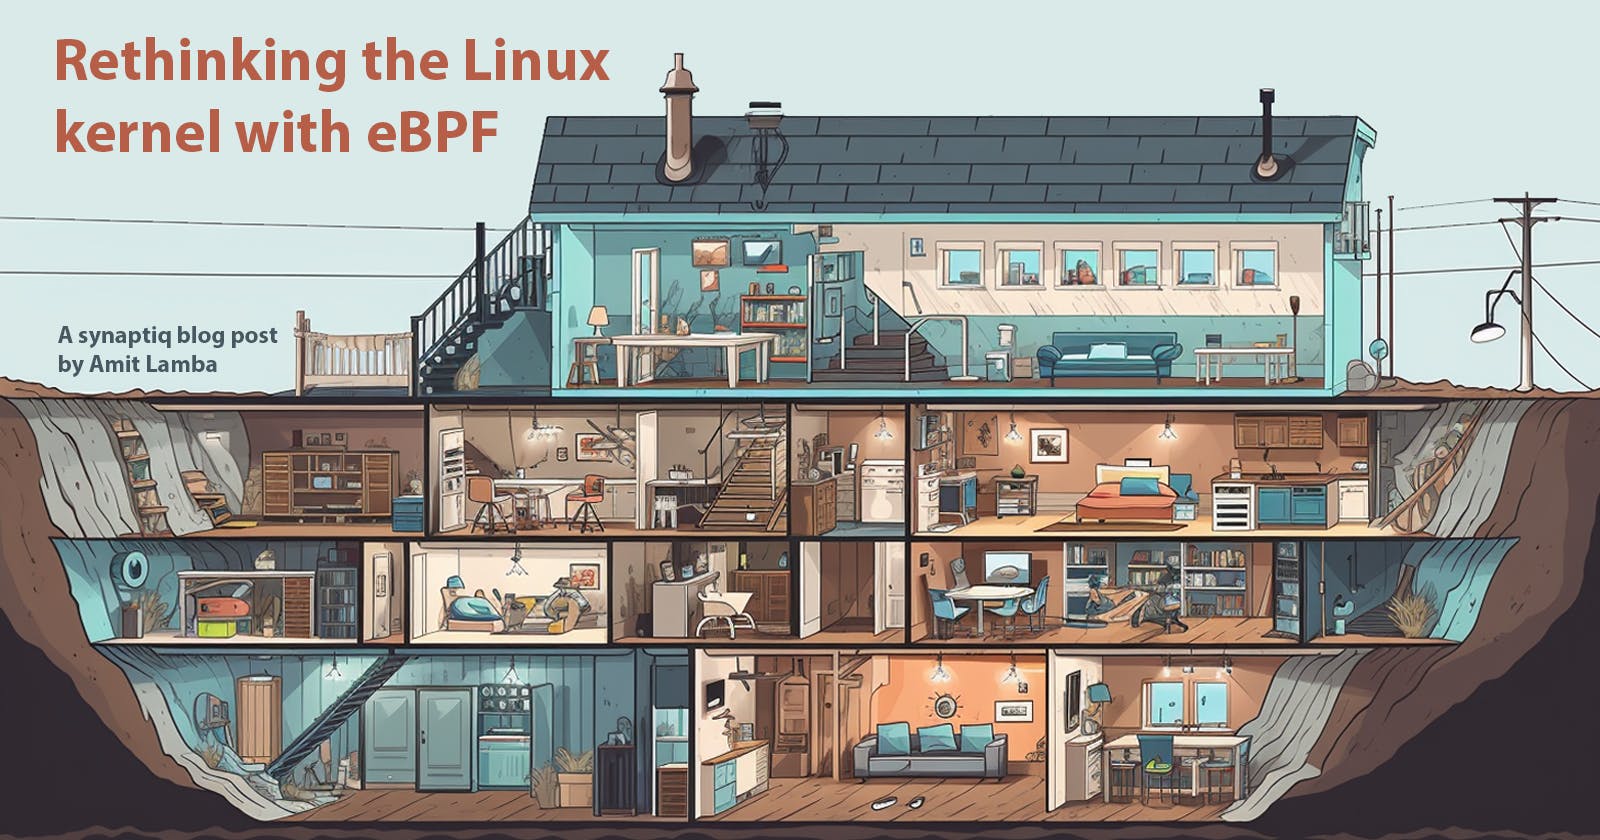 Rethinking the Linux kernel with eBPF